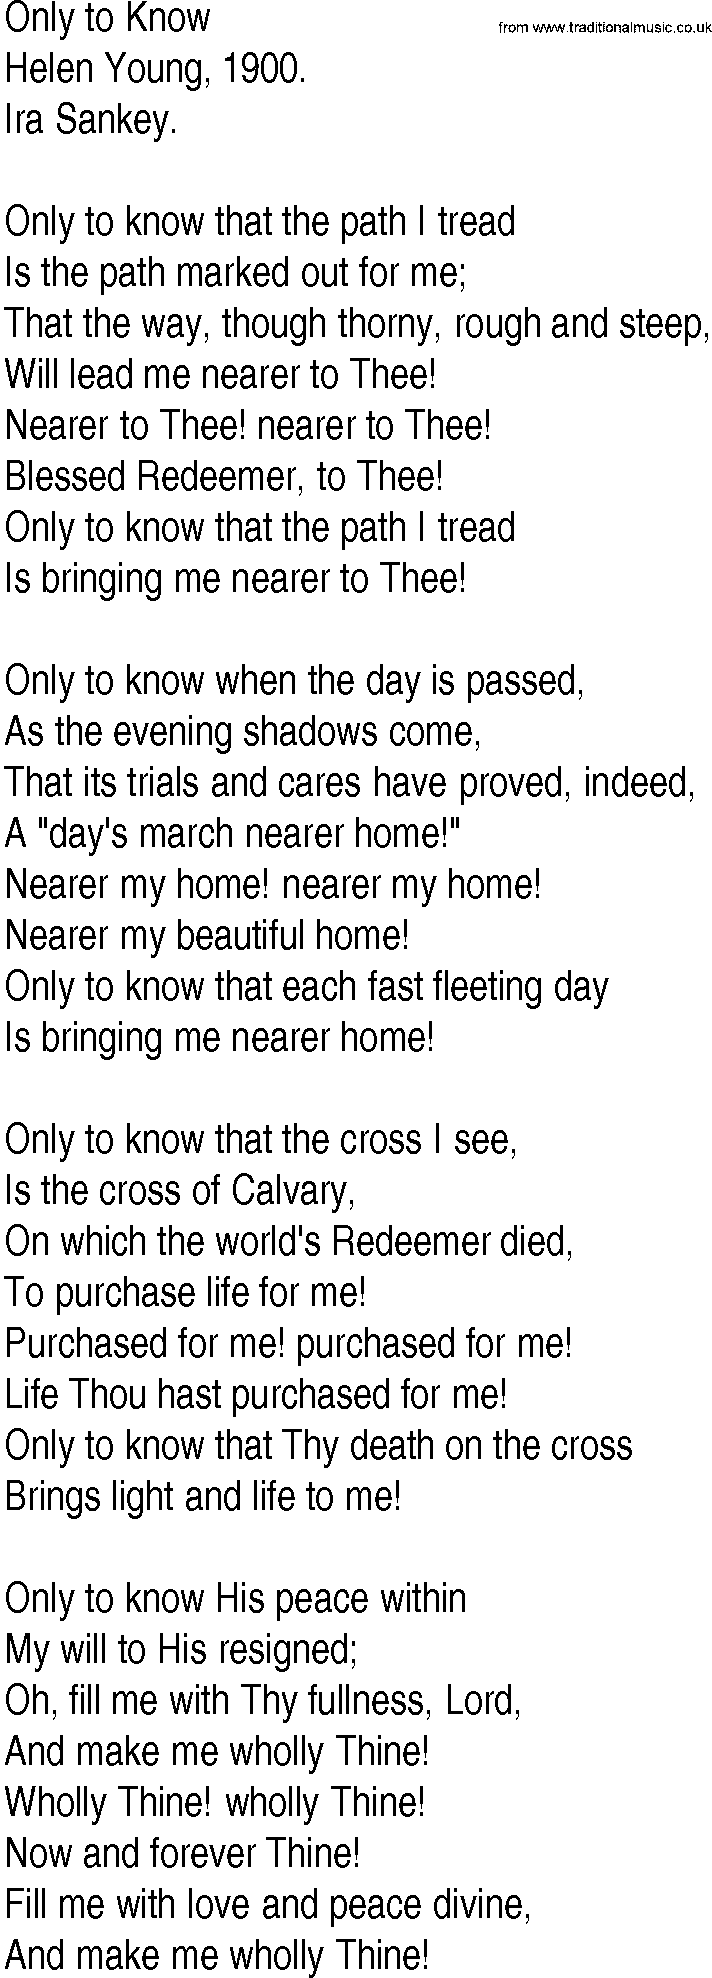 Hymn and Gospel Song: Only to Know by Helen Young lyrics